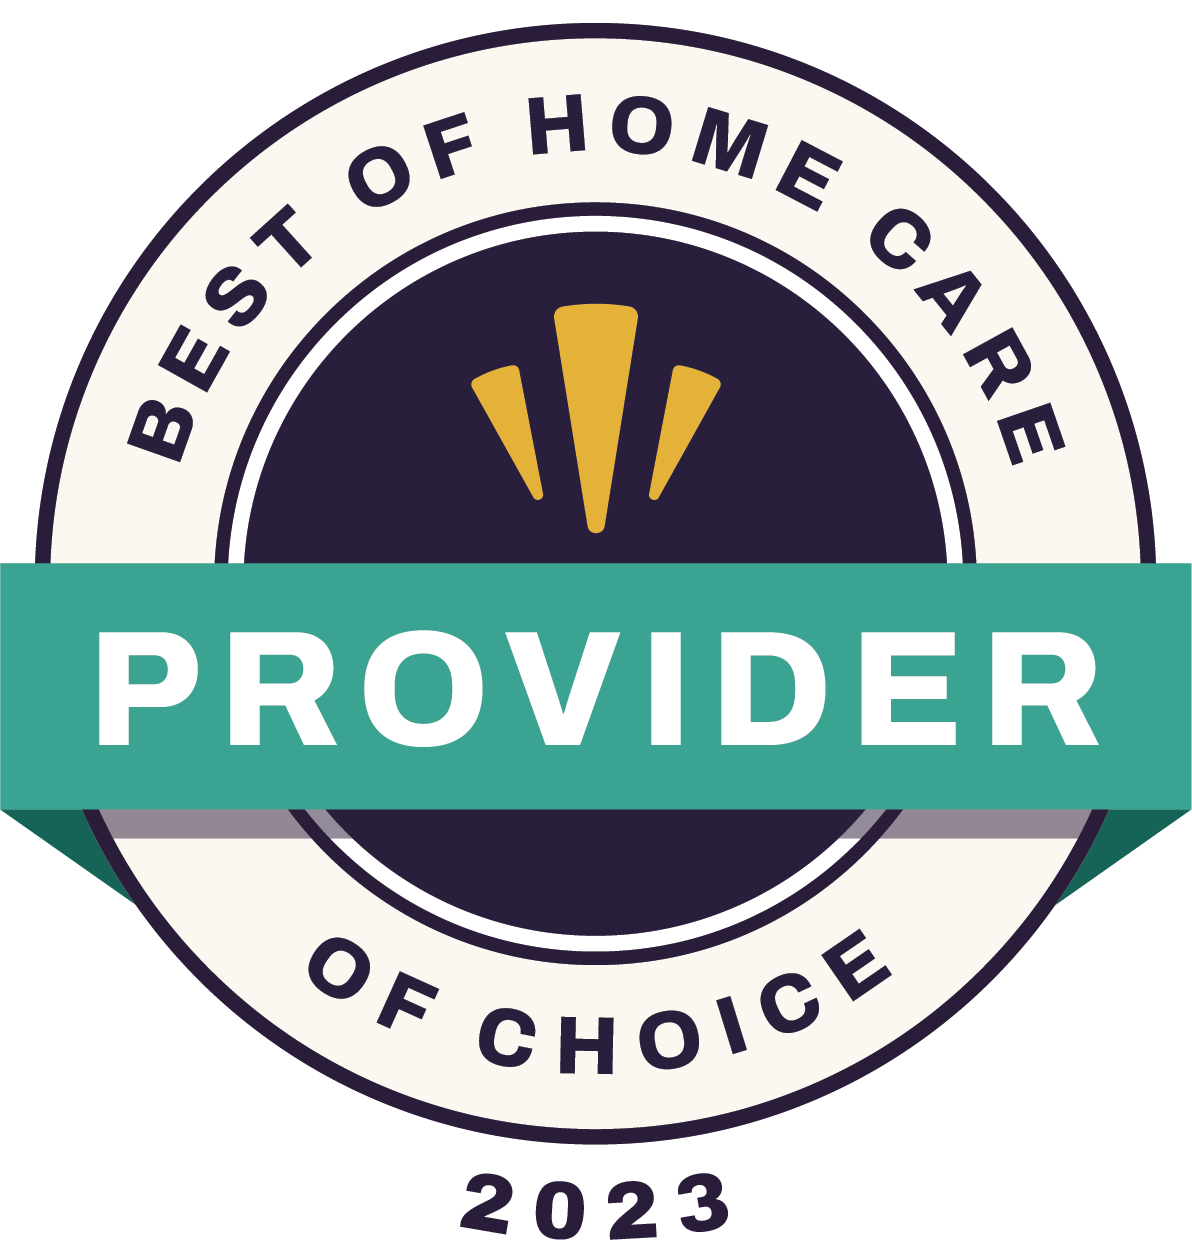 2023-Provider-of-Choice.png